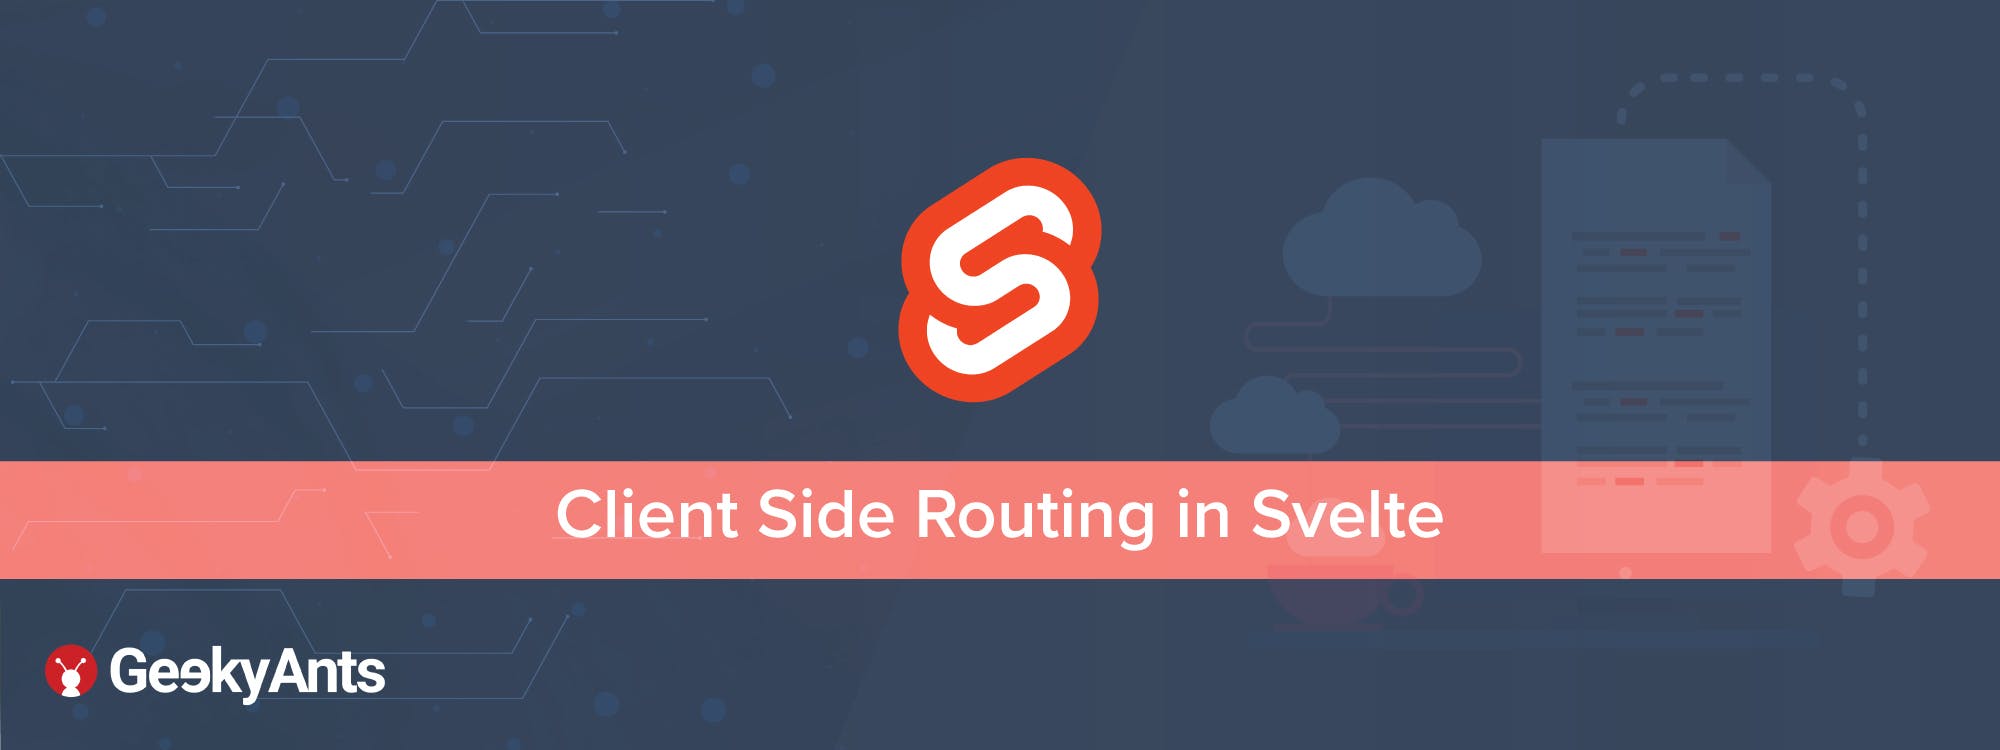 Client Side Routing in Svelte